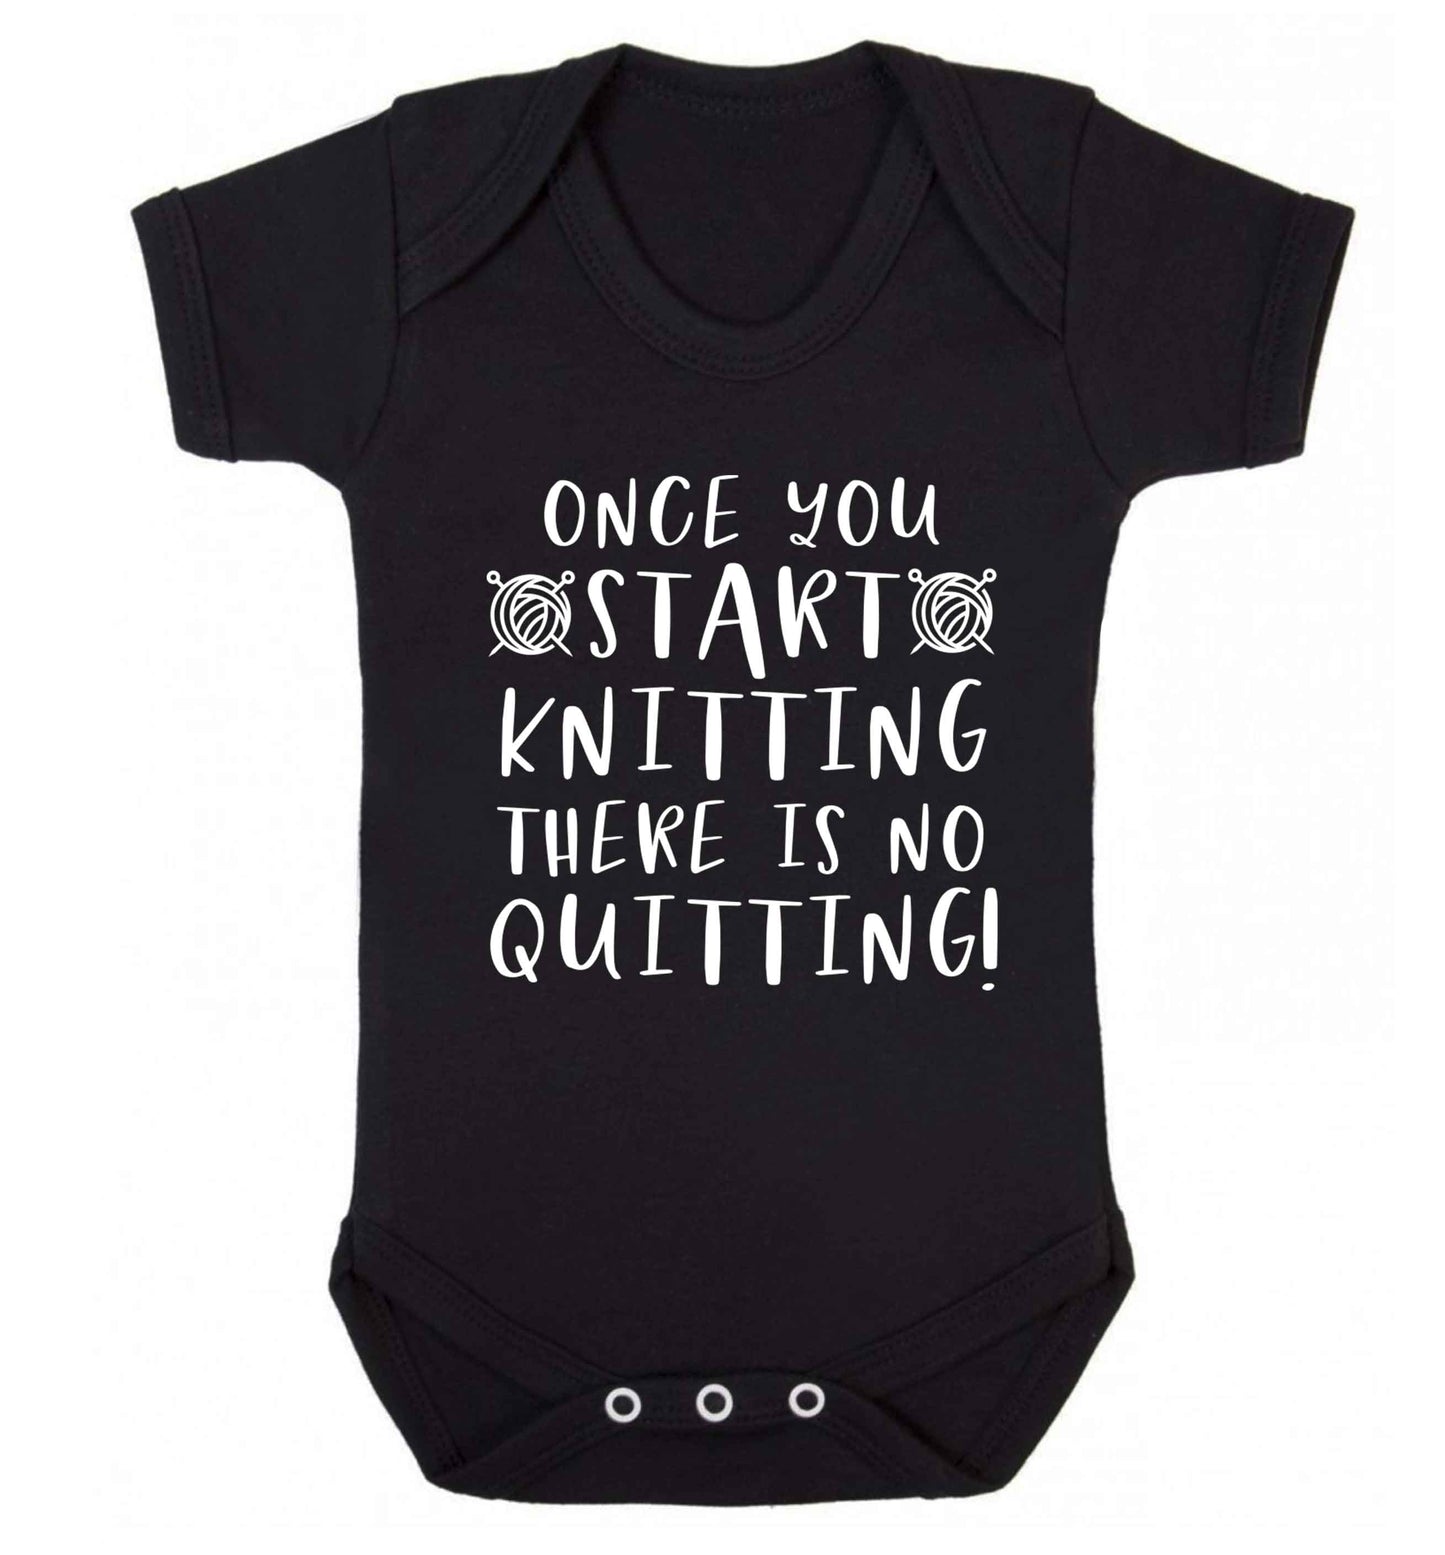 Once you start knitting there is no quitting! Baby Vest black 18-24 months